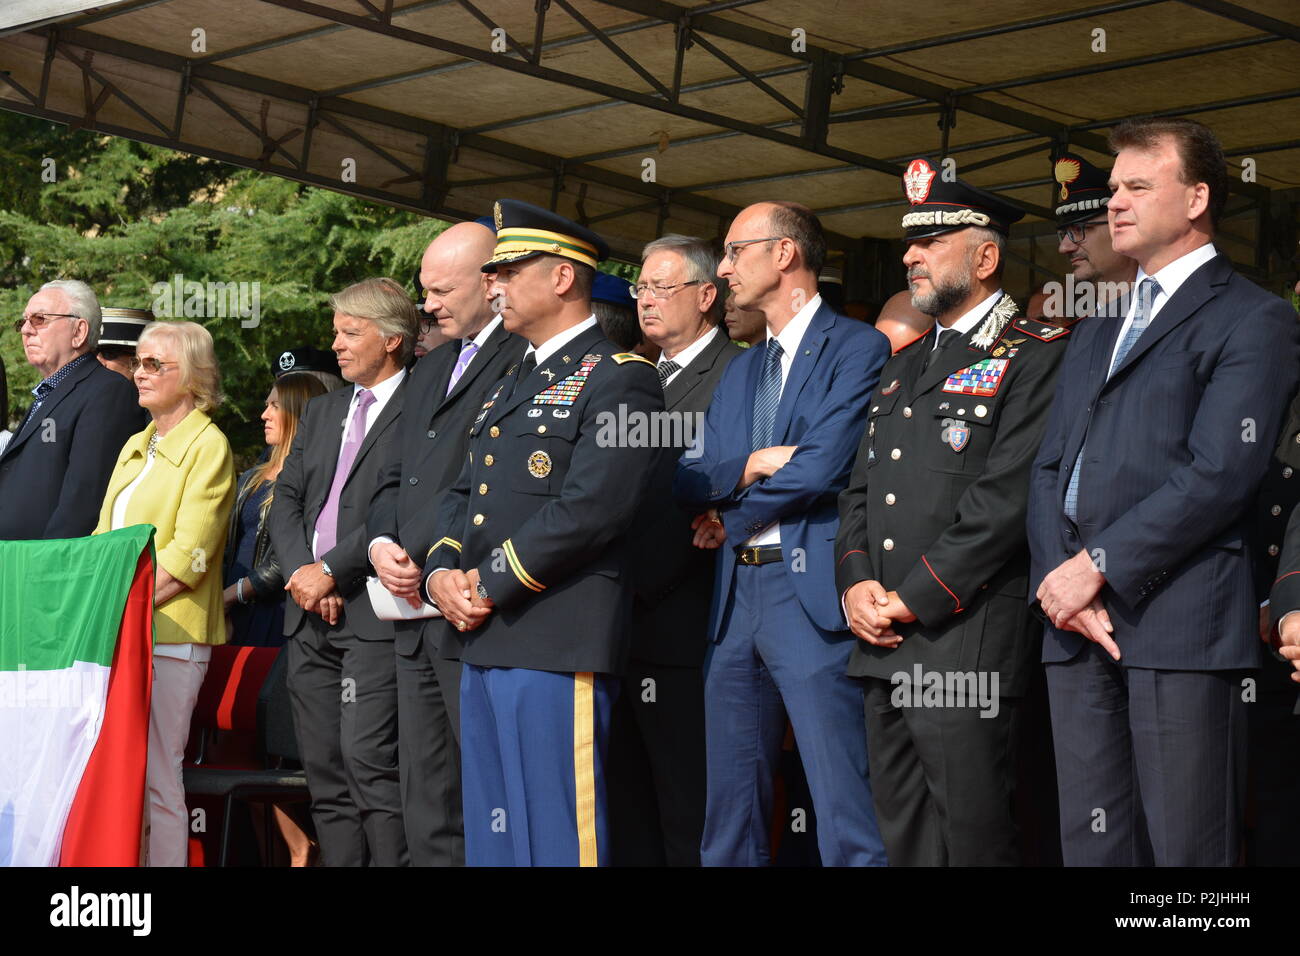 US, European and African authorities stand together during the European Union Police Services Training (EUPST) 2015 – 2018 closing ceremony at General A. Chinotto barracks, Vicenza, Italy, Sept. 30, 2016. The Italian Carabinieri organized the EUPST 2015 – 2018 Italian session from Sept. 19-30. The training audience consisted of approximately 200 police officers and gendarmes from the European Union, United States and across Africa. (U.S. Army Photo by Visual Information Specialist Paolo Bovo/released) Stock Photo